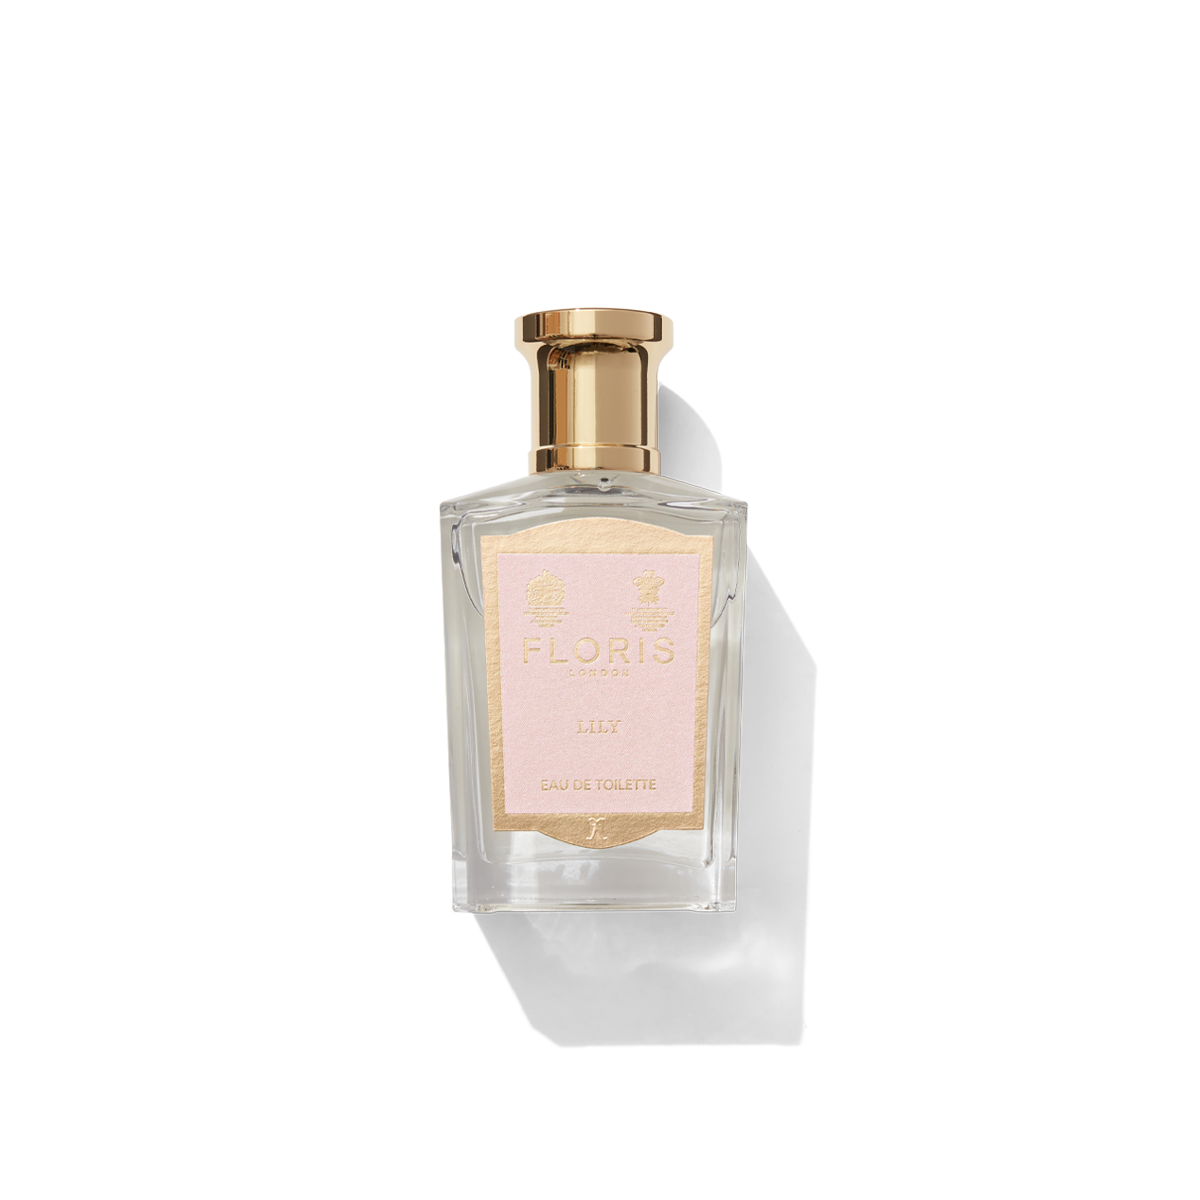 Lily Eau de Toilette in medium glass bottle with pink and gold label